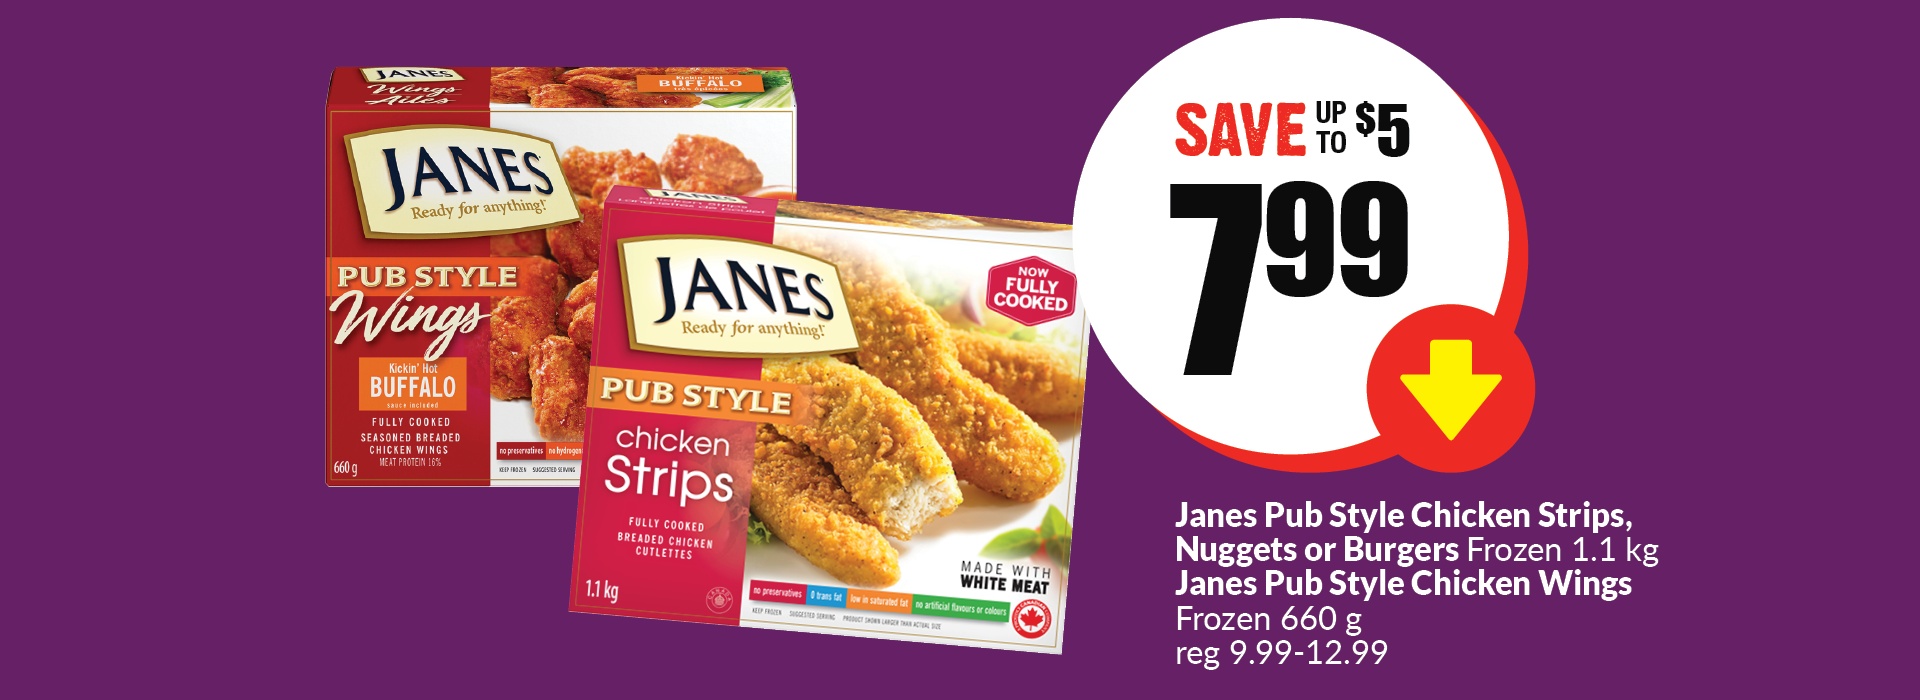 The following image contains the text " Janes pub style chicken strips, Nuggets or Burgers frozen 1.1 kg, Janes pub style chicken Wings frozen 660 g, reg 9.99-12.99. Get them at just $7.99 and save up to $5."